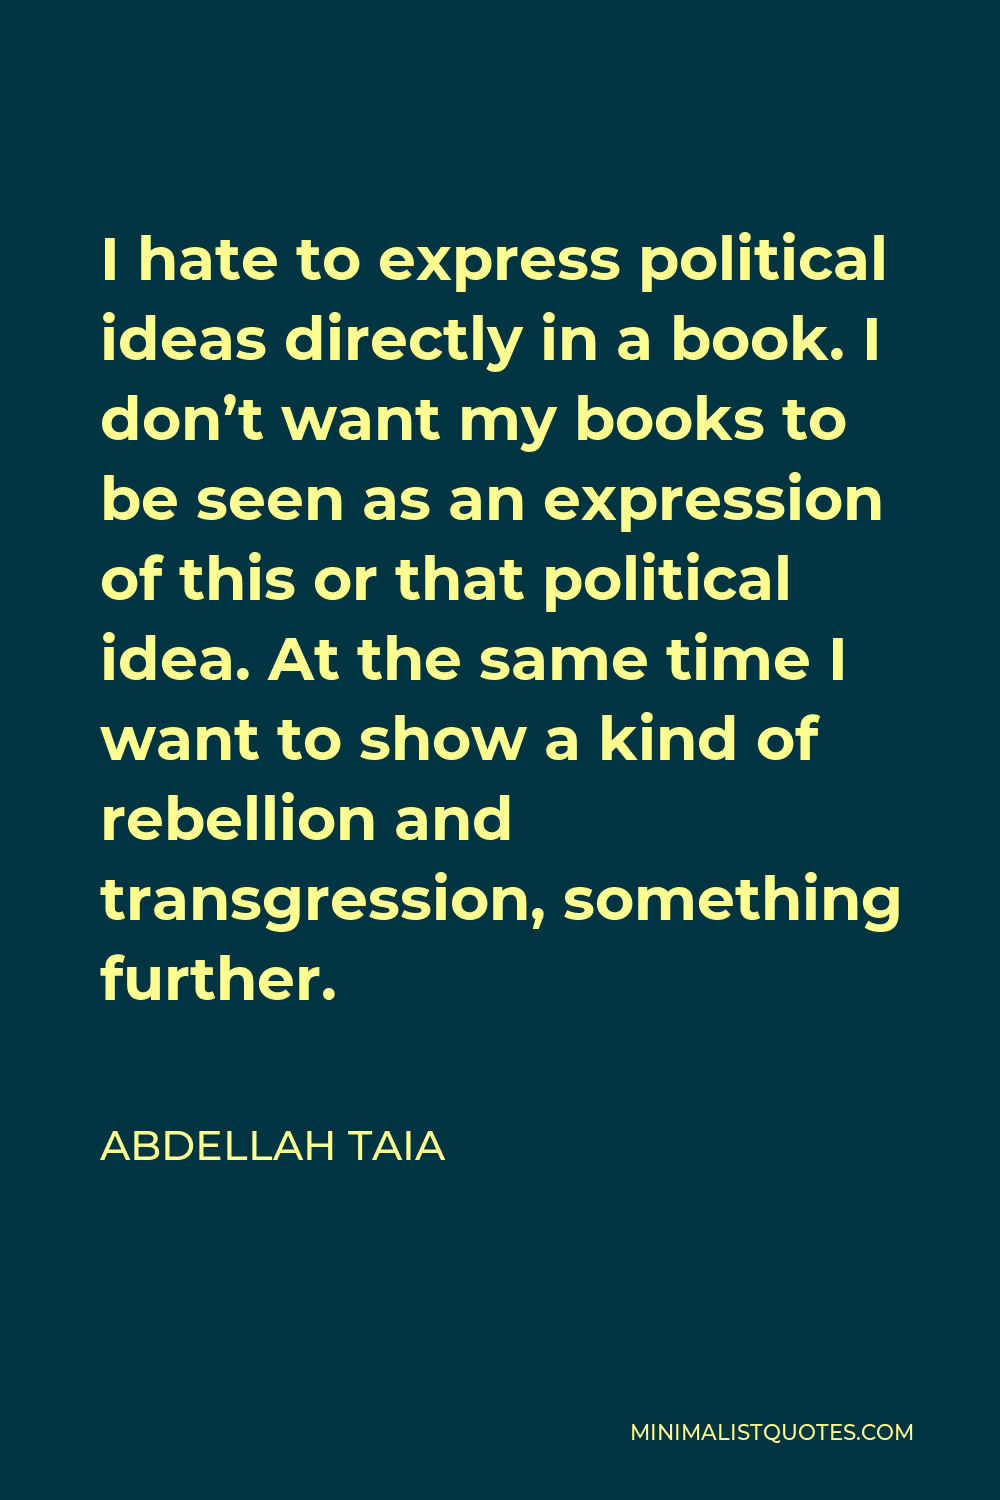 Abdellah Taia Quote - I hate to express political ideas directly in a book. I don’t want my books to be seen as an expression of this or that political idea. At the same time I want to show a kind of rebellion and transgression, something further.